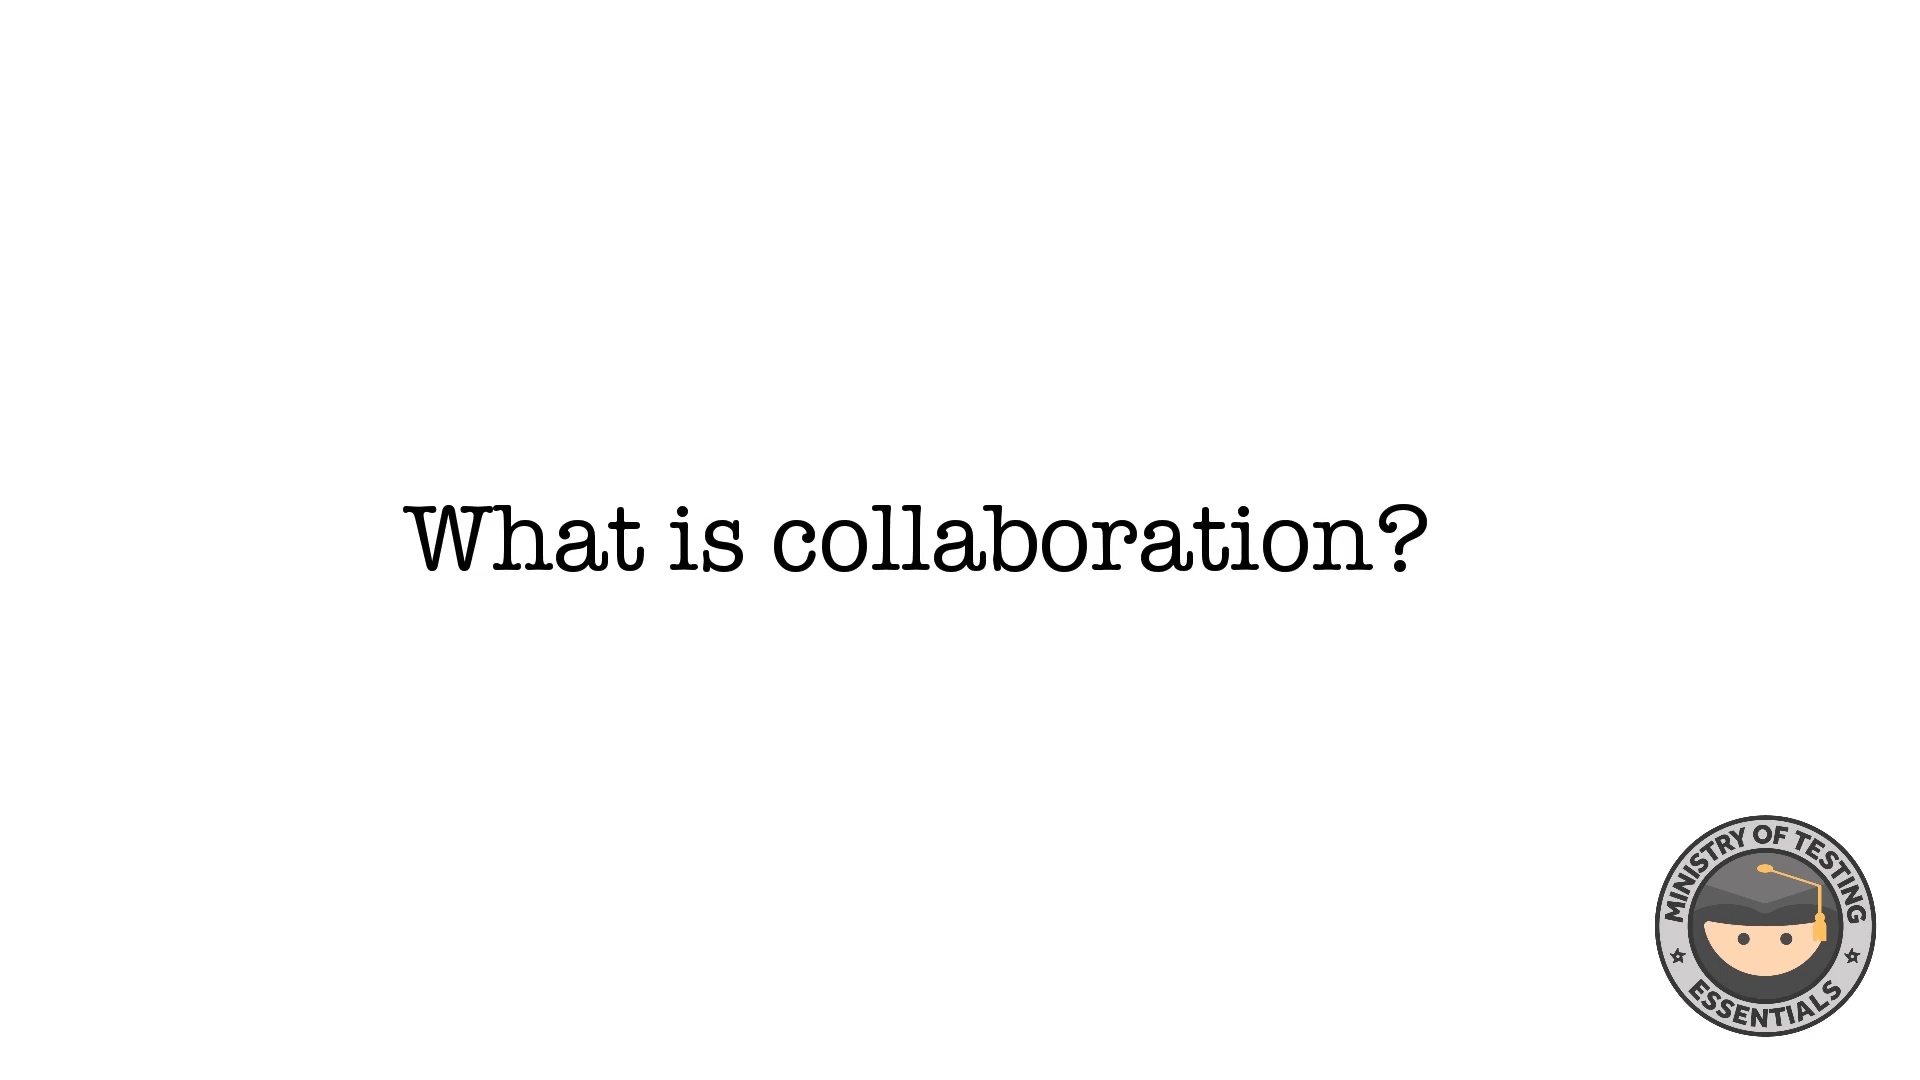 What is Collaboration?